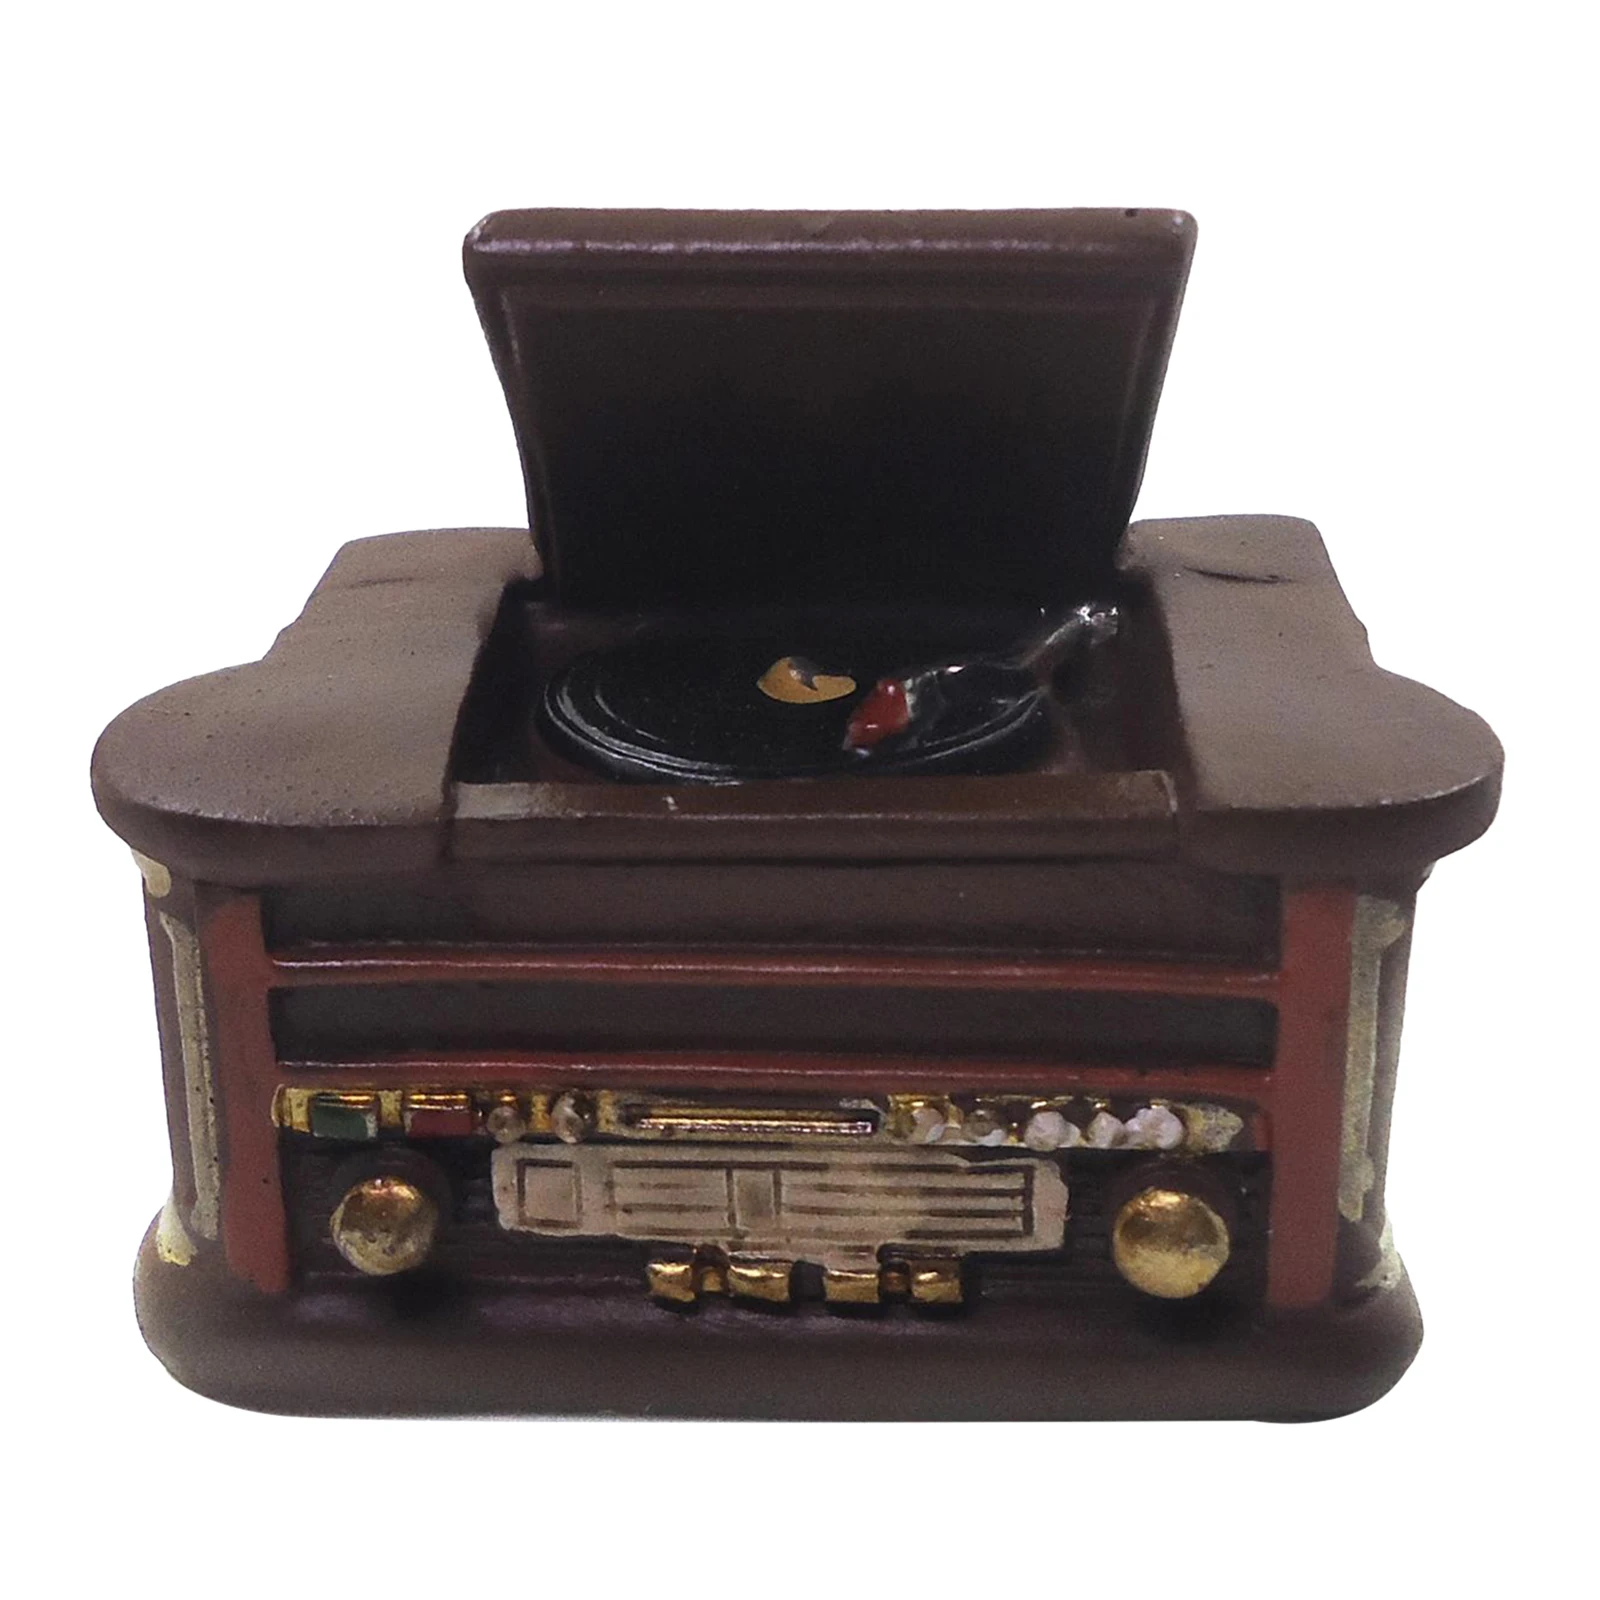 Dolls House Accessories,1/12 Miniature Dollhouse Phonograph Record Player Decoration, Doll Furniture Accessory